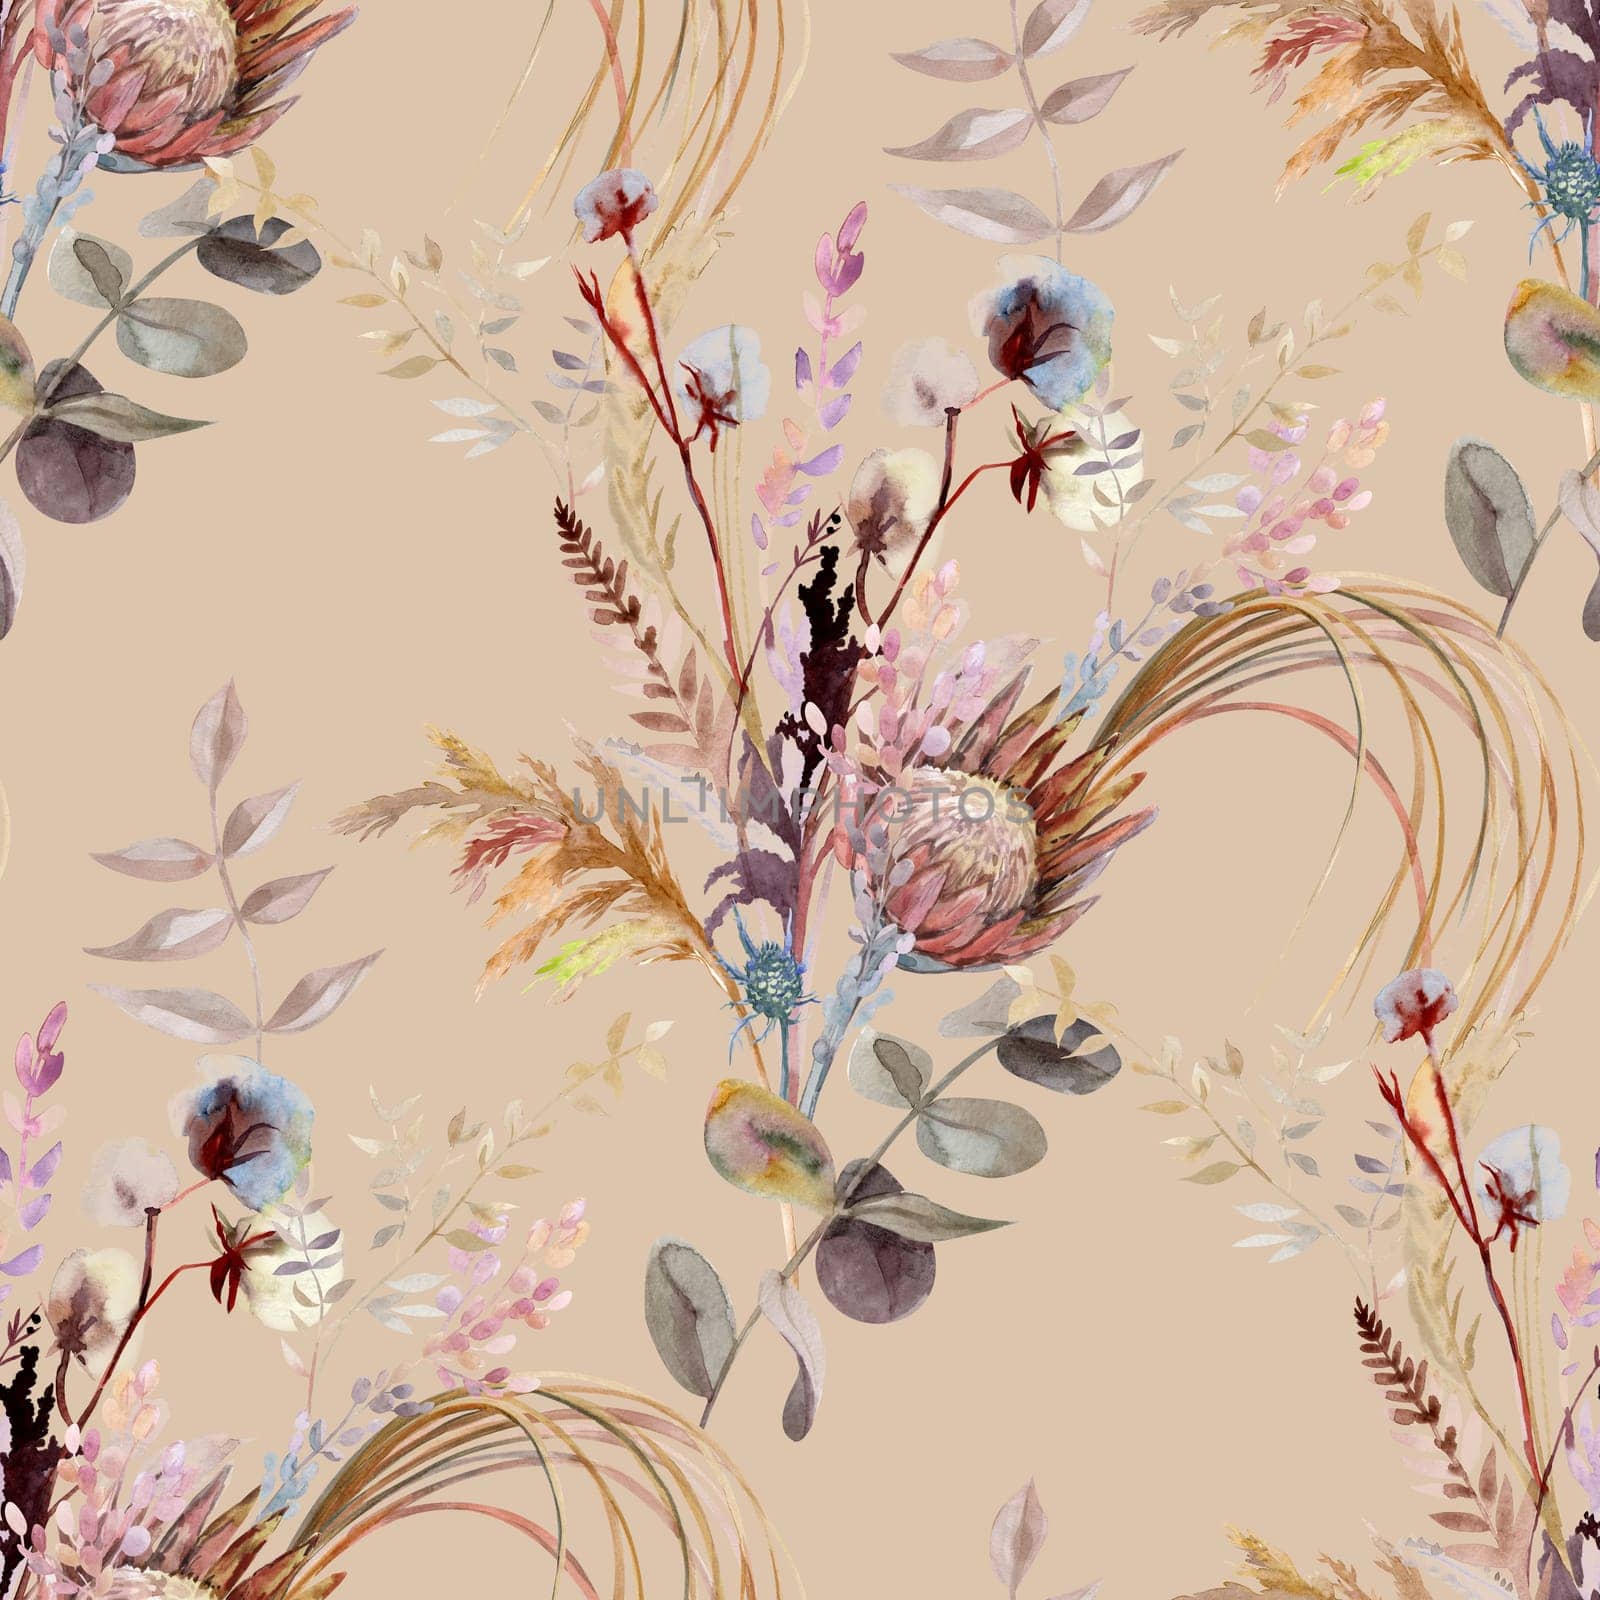 Seamless pattern with tropical dry flowers in boho style painted in watercolor for women's summer textile summer dresses and surface design